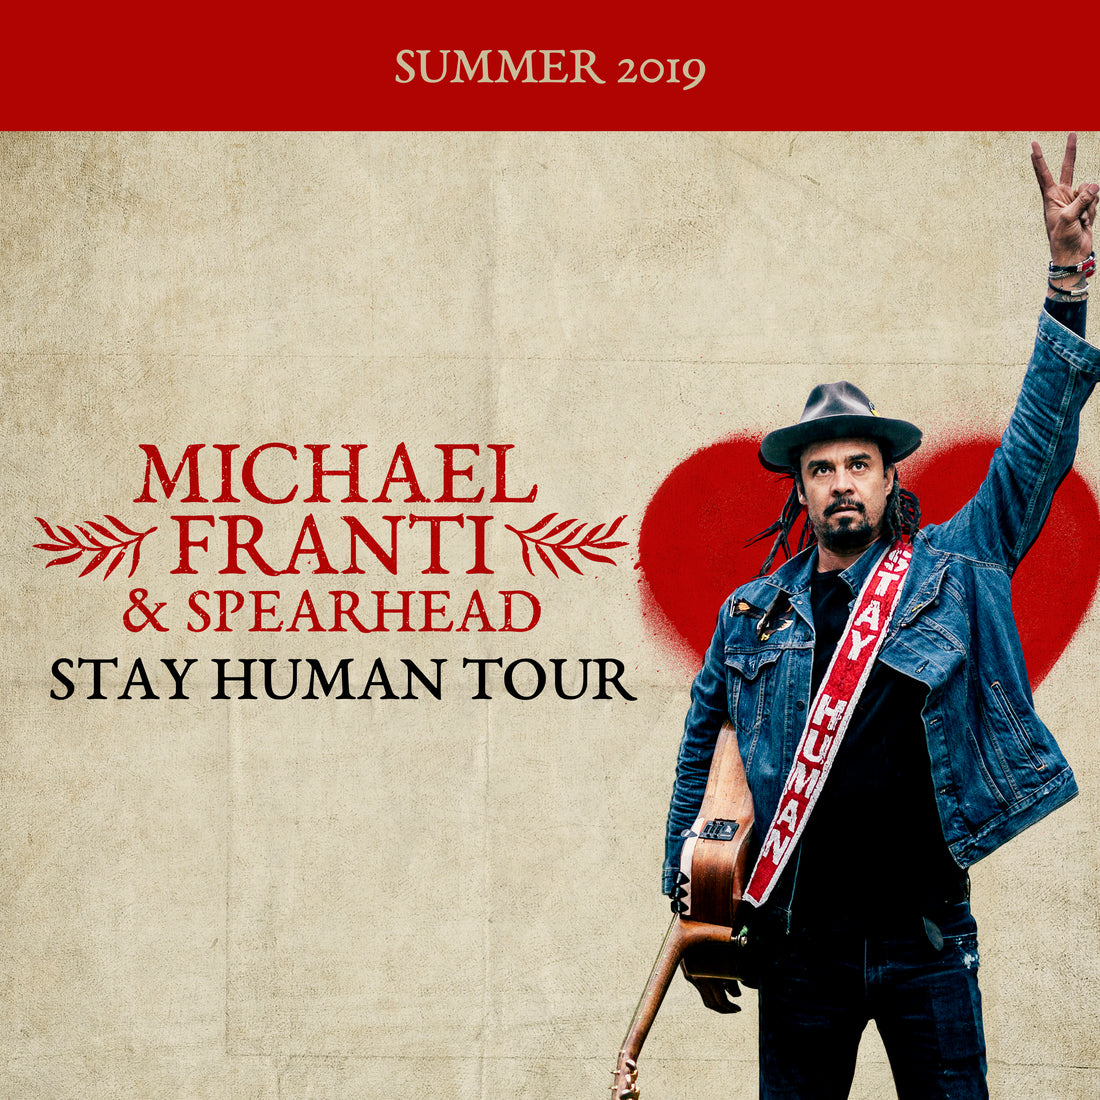 Just Announced! Stay Human Tour